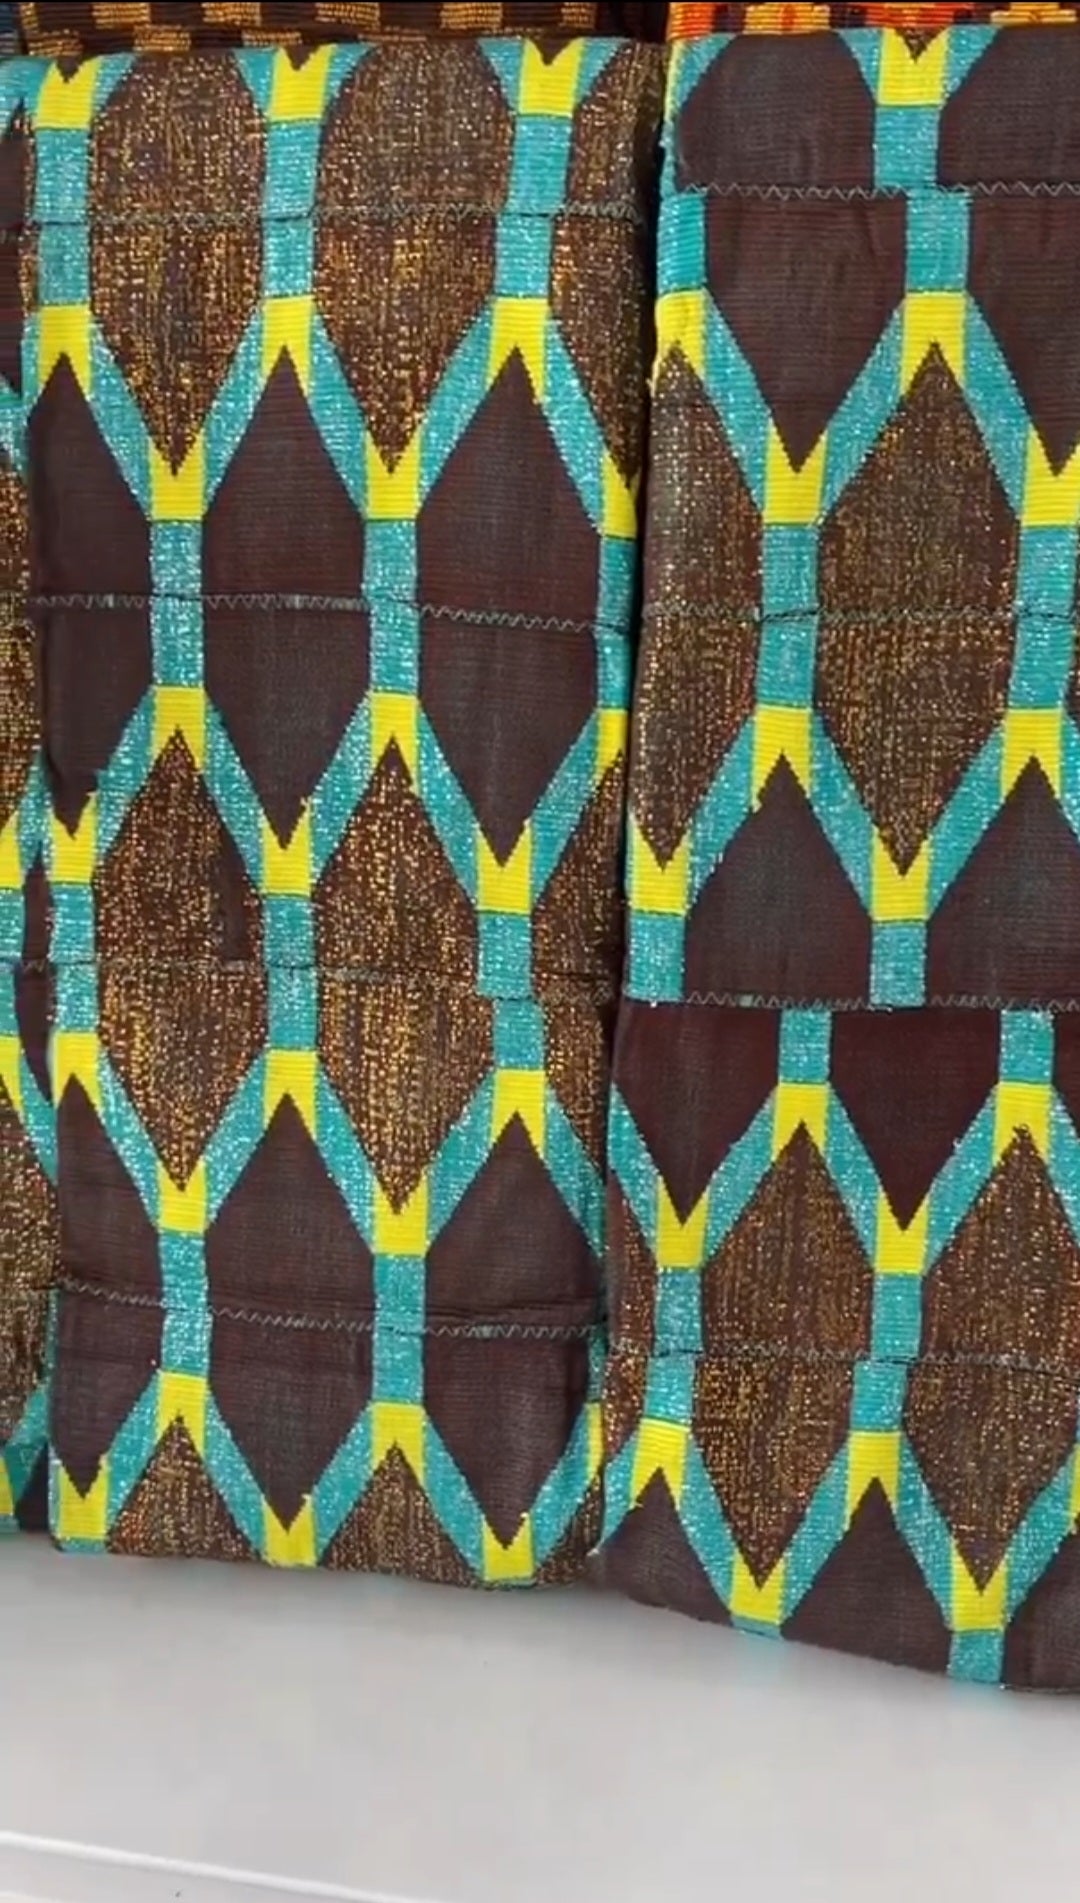 Authentic Hand Weaved Kente Cloth A2565